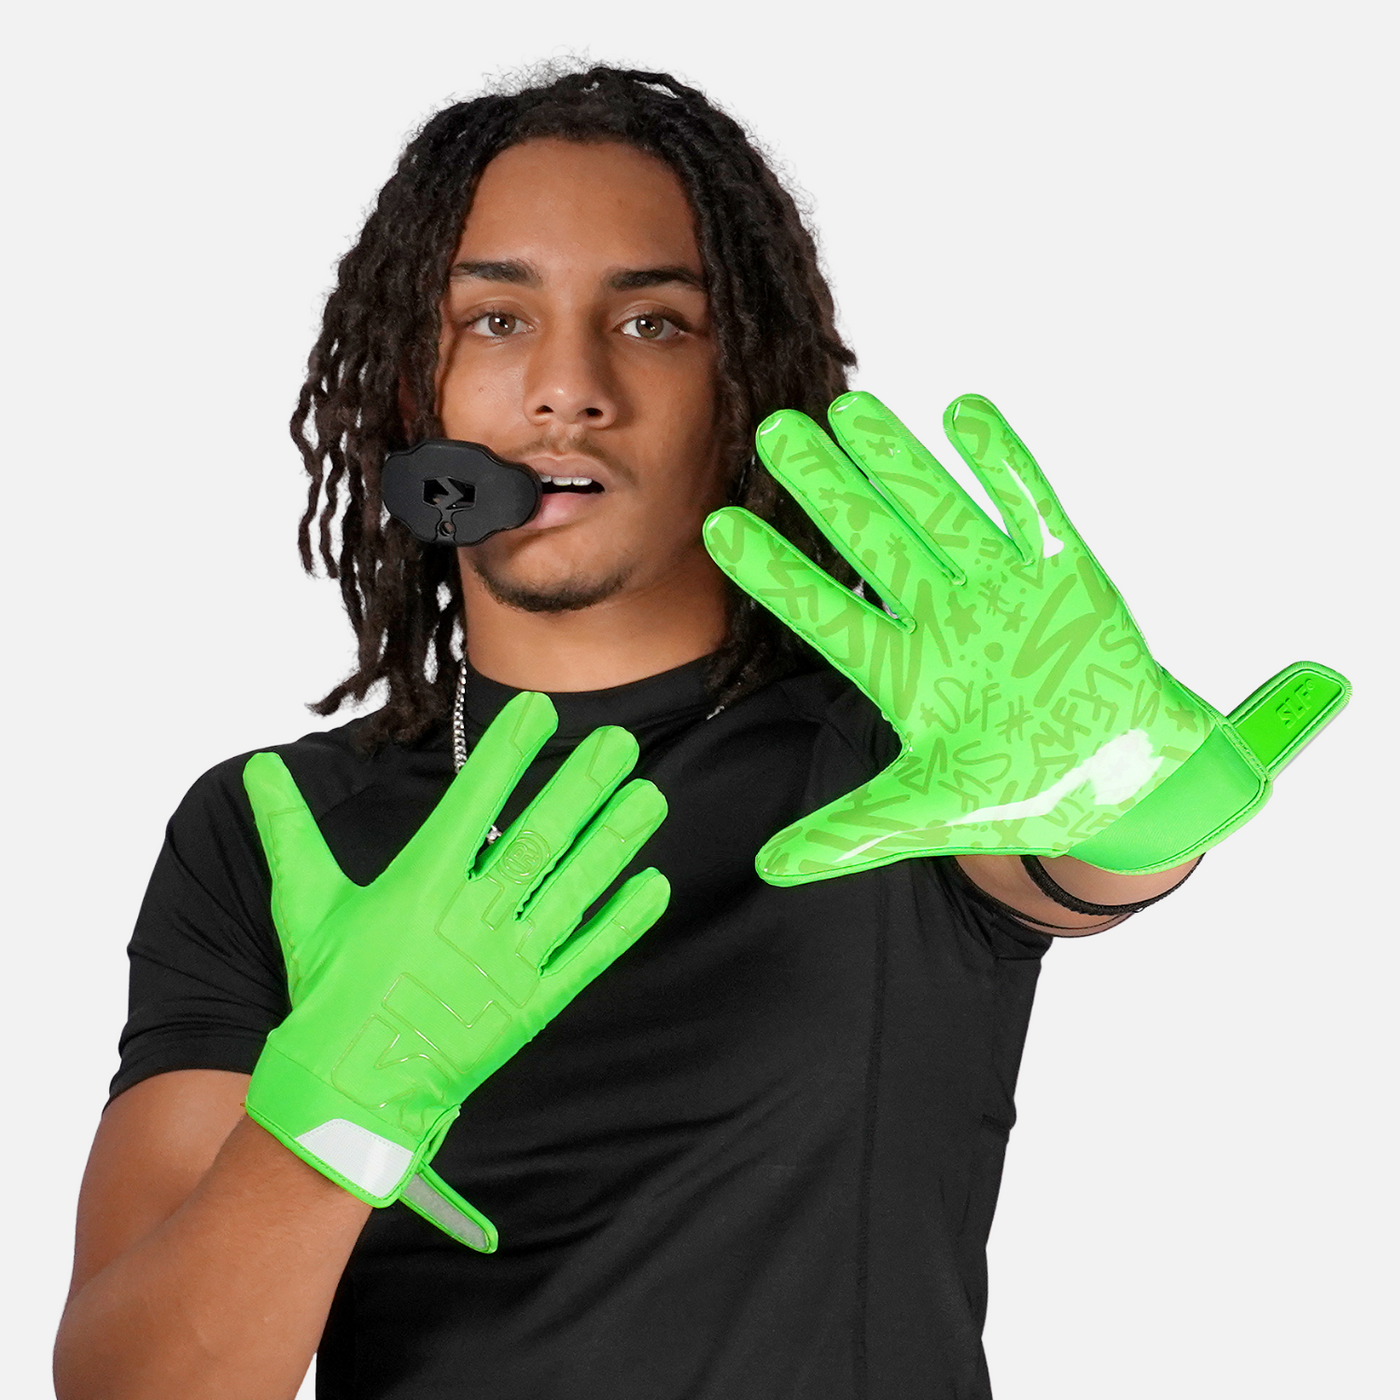 Neon Green Sticky Football Receiver Gloves